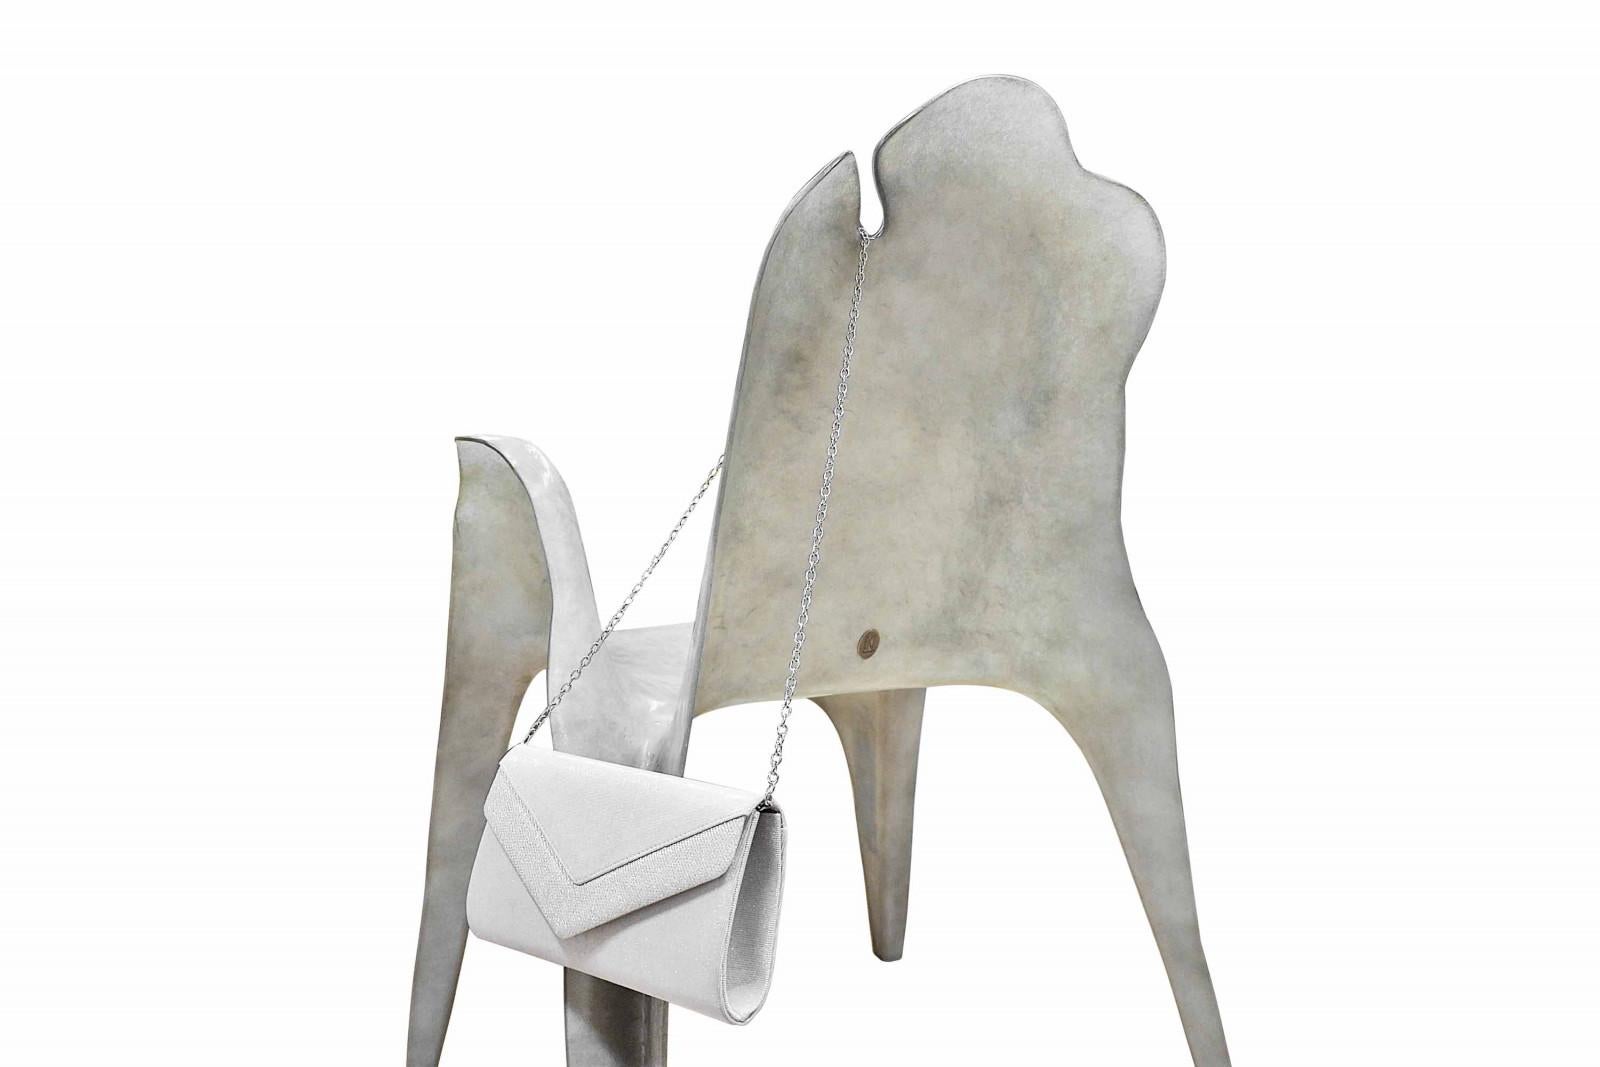 Contemporary Sculptural Dining Chairs in Metallic Finish In New Condition For Sale In New York, NY